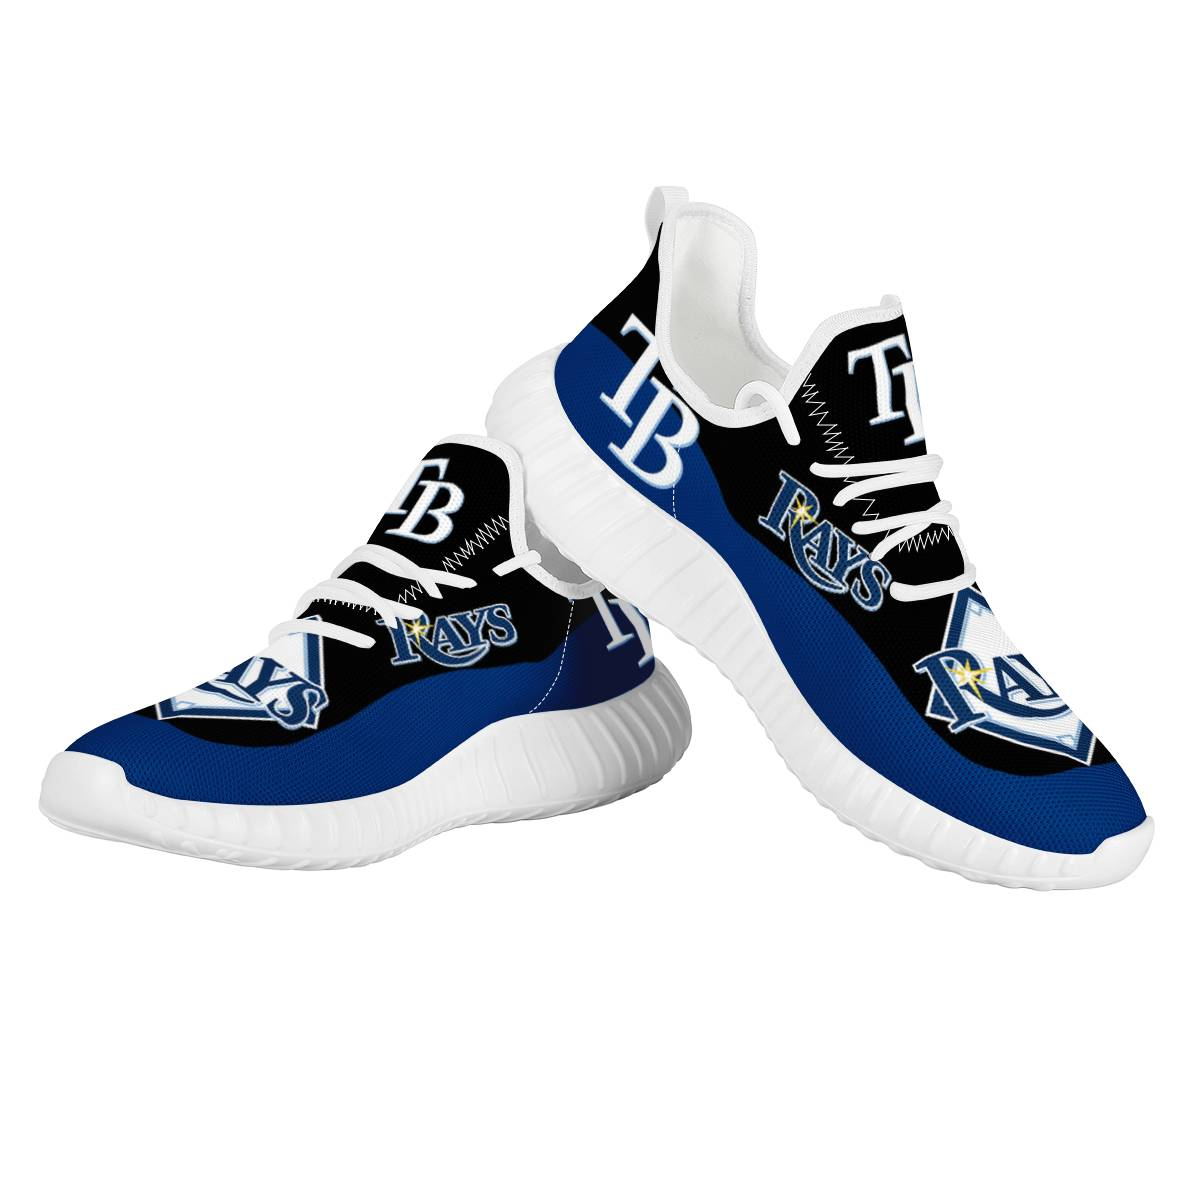 Women's MLB Tampa Bay Rays Mesh Knit Sneakers/Shoes 002